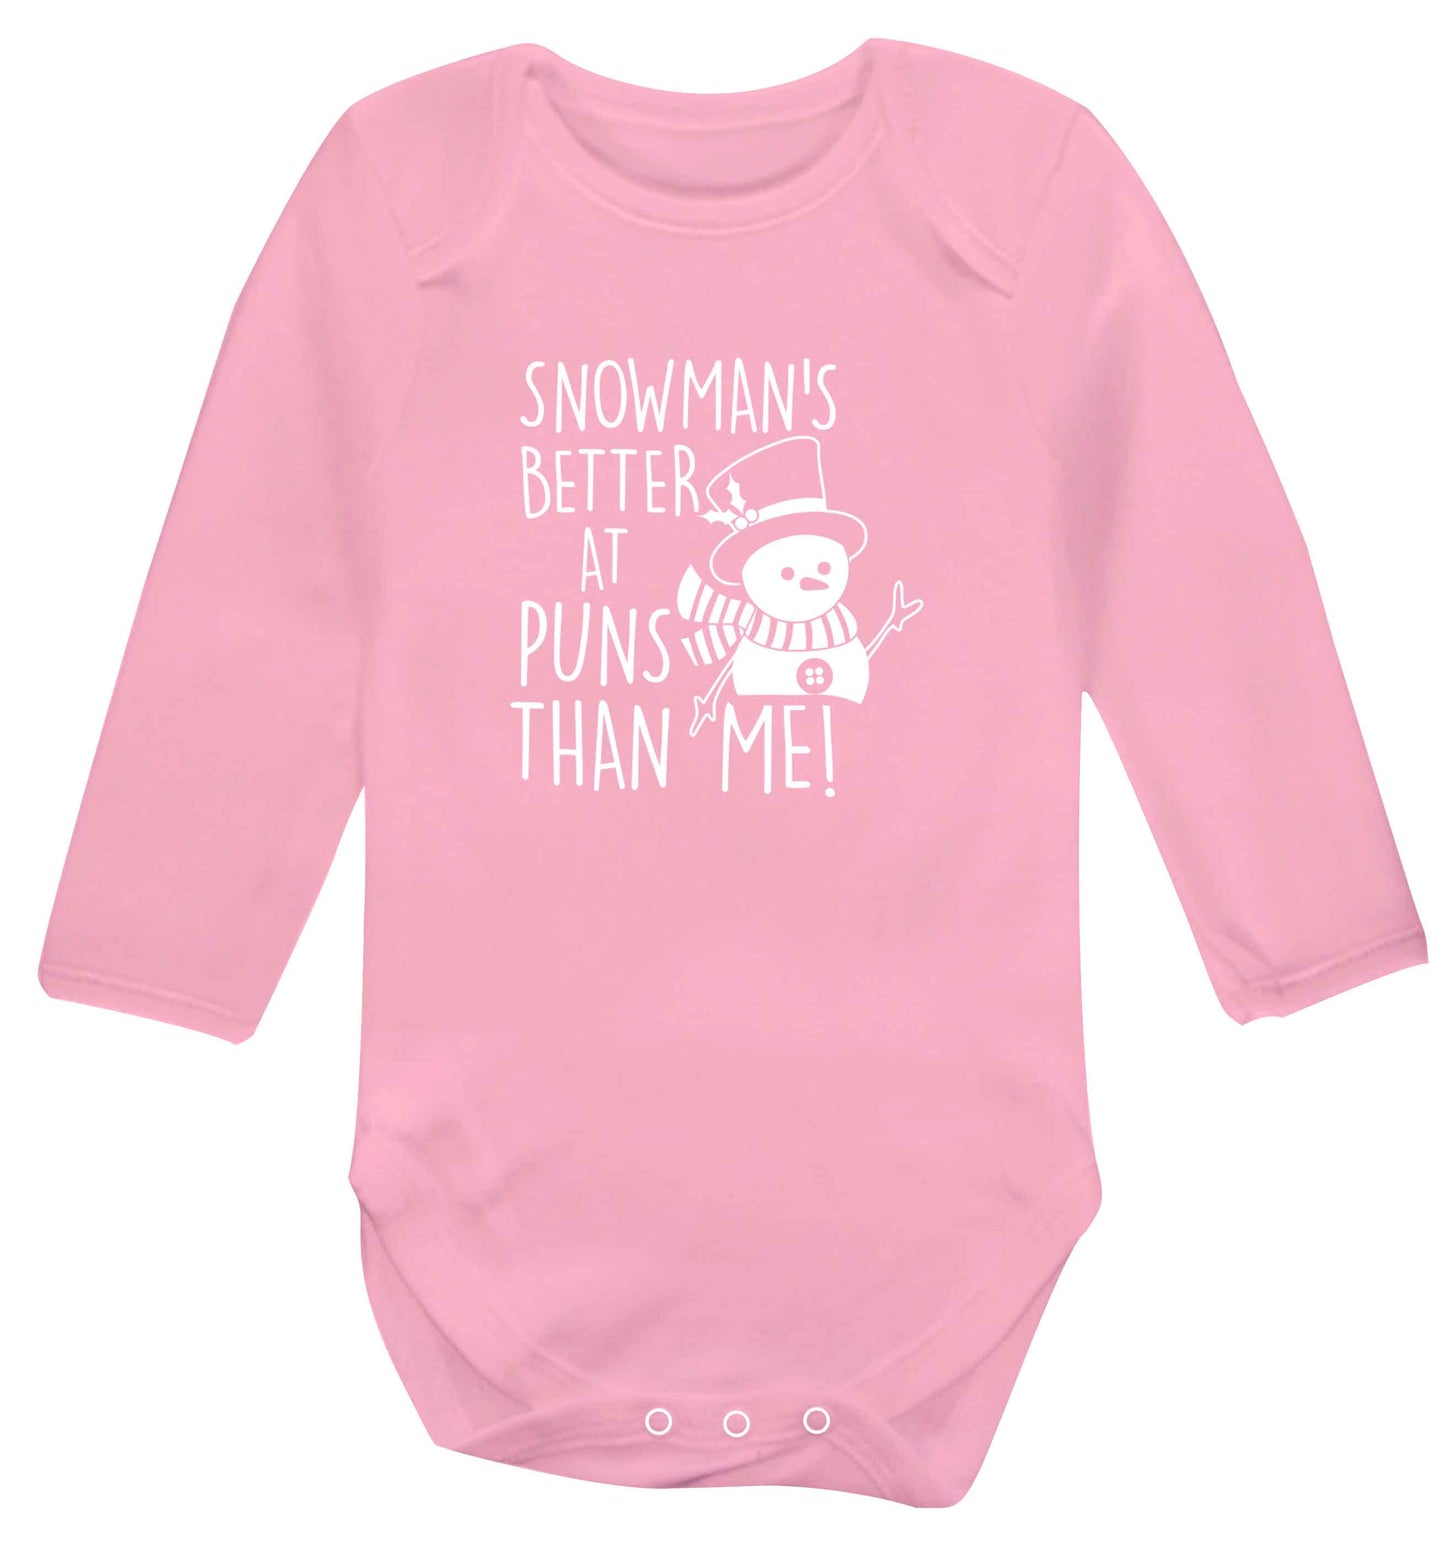 Snowman's Puns Me baby vest long sleeved pale pink 6-12 months